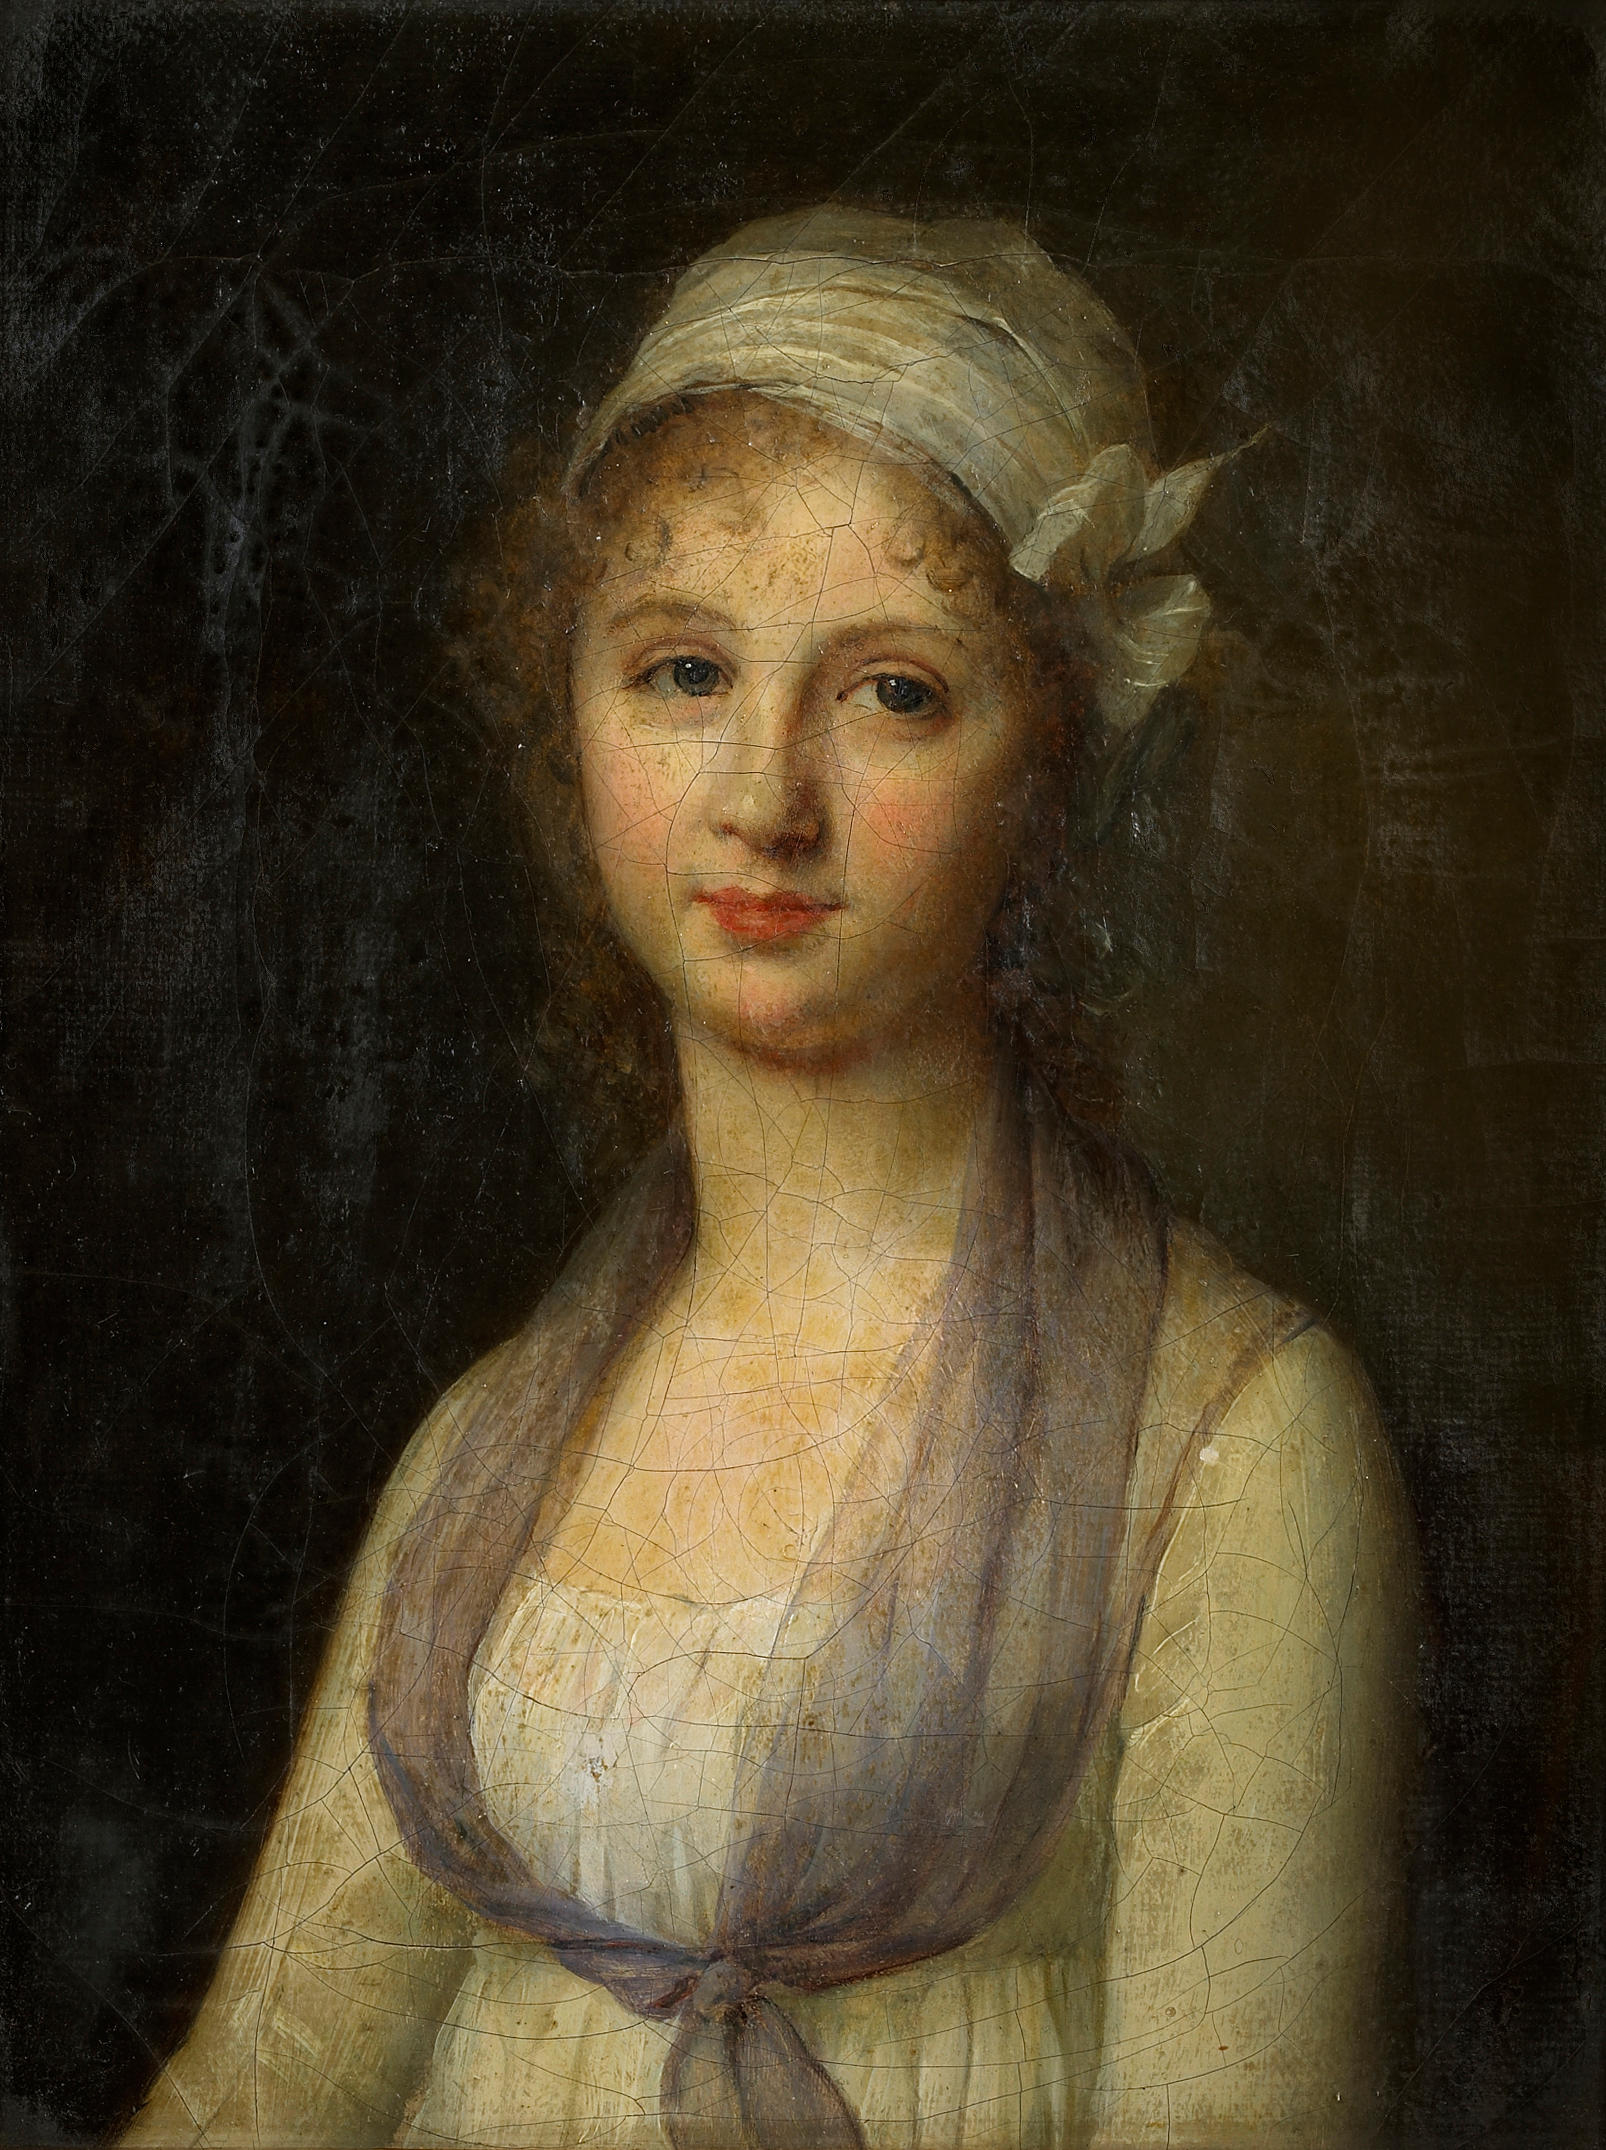 Attributed to Louis Léopold Boilly (French, 1761-1845)